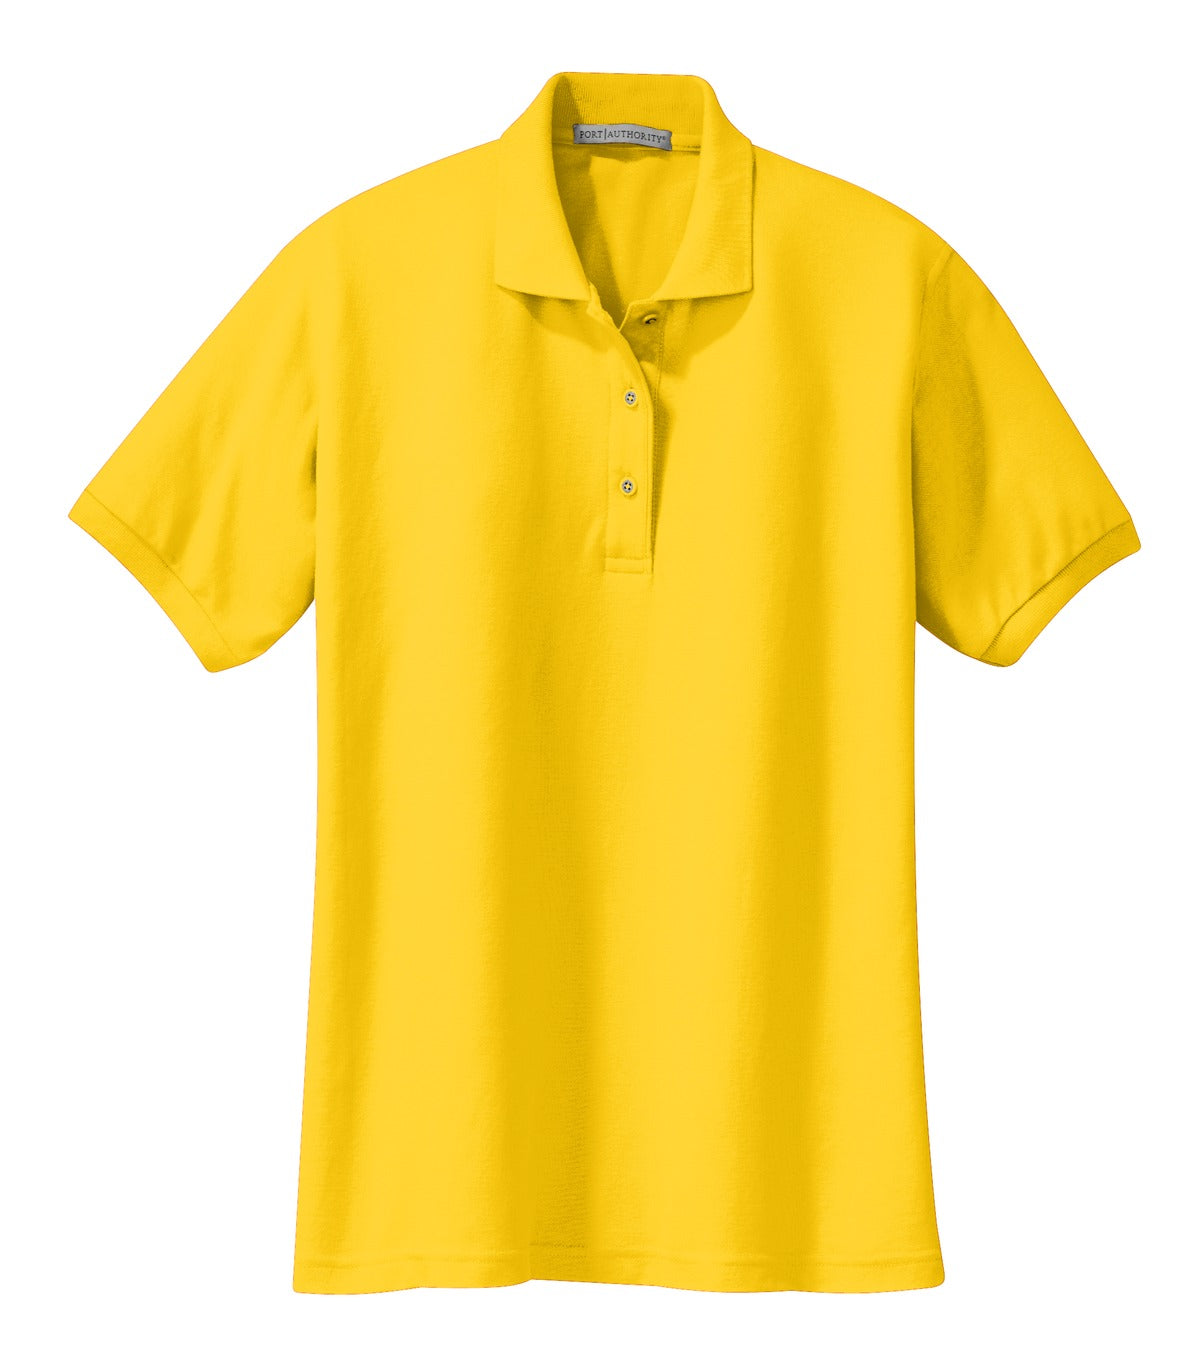 [Custom] Cotton Blend Polo (Ladies) (Colors: Green, Yellow) [L500]